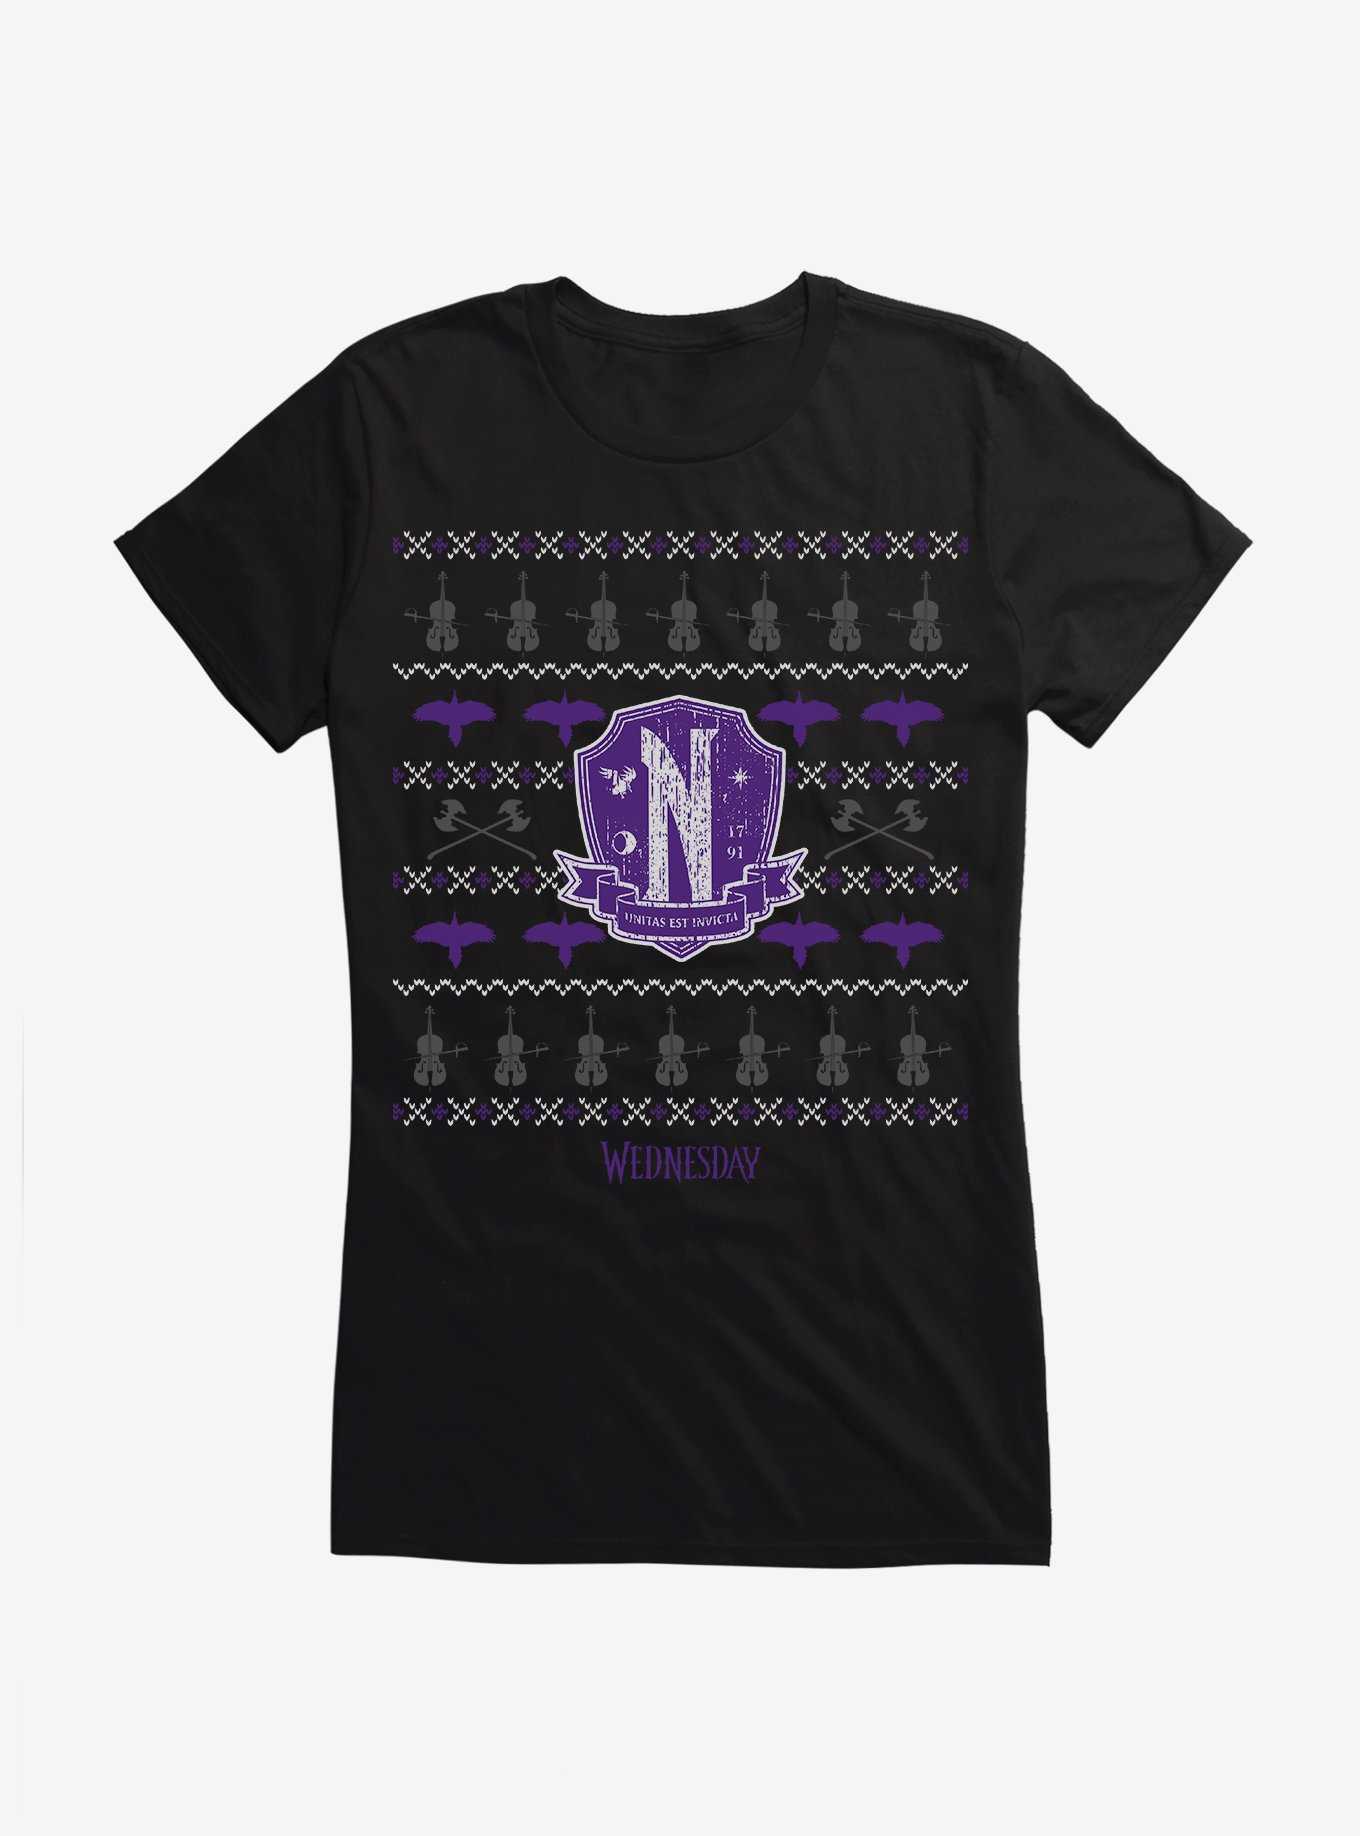 Wednesday Nevermore Christmas Sweater Pattern Girls T-Shirt, , hi-res